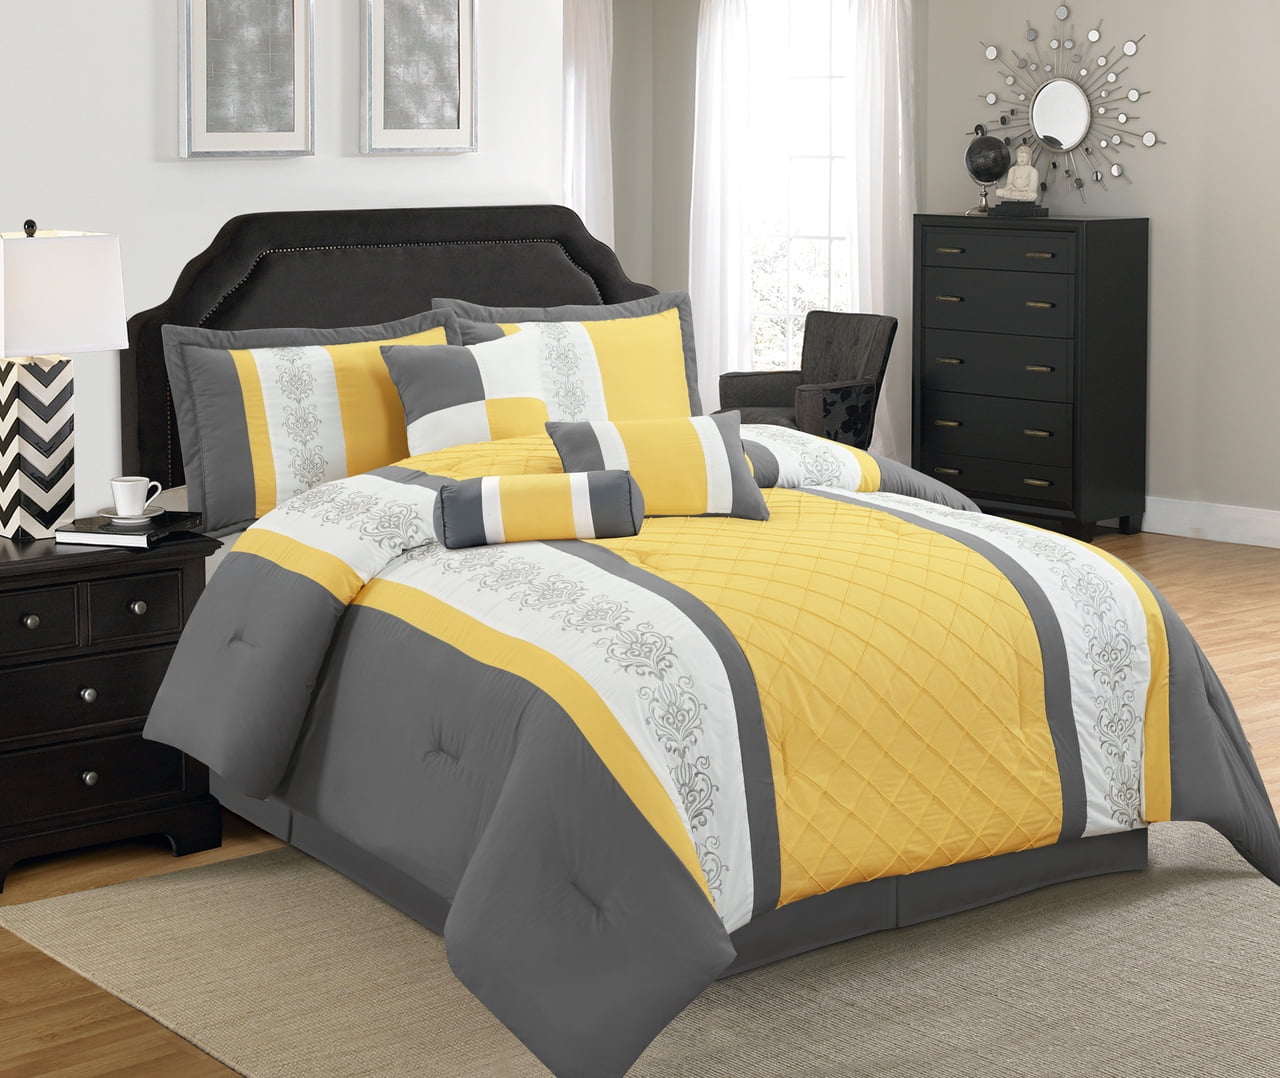 Grey and yellow king size bedding